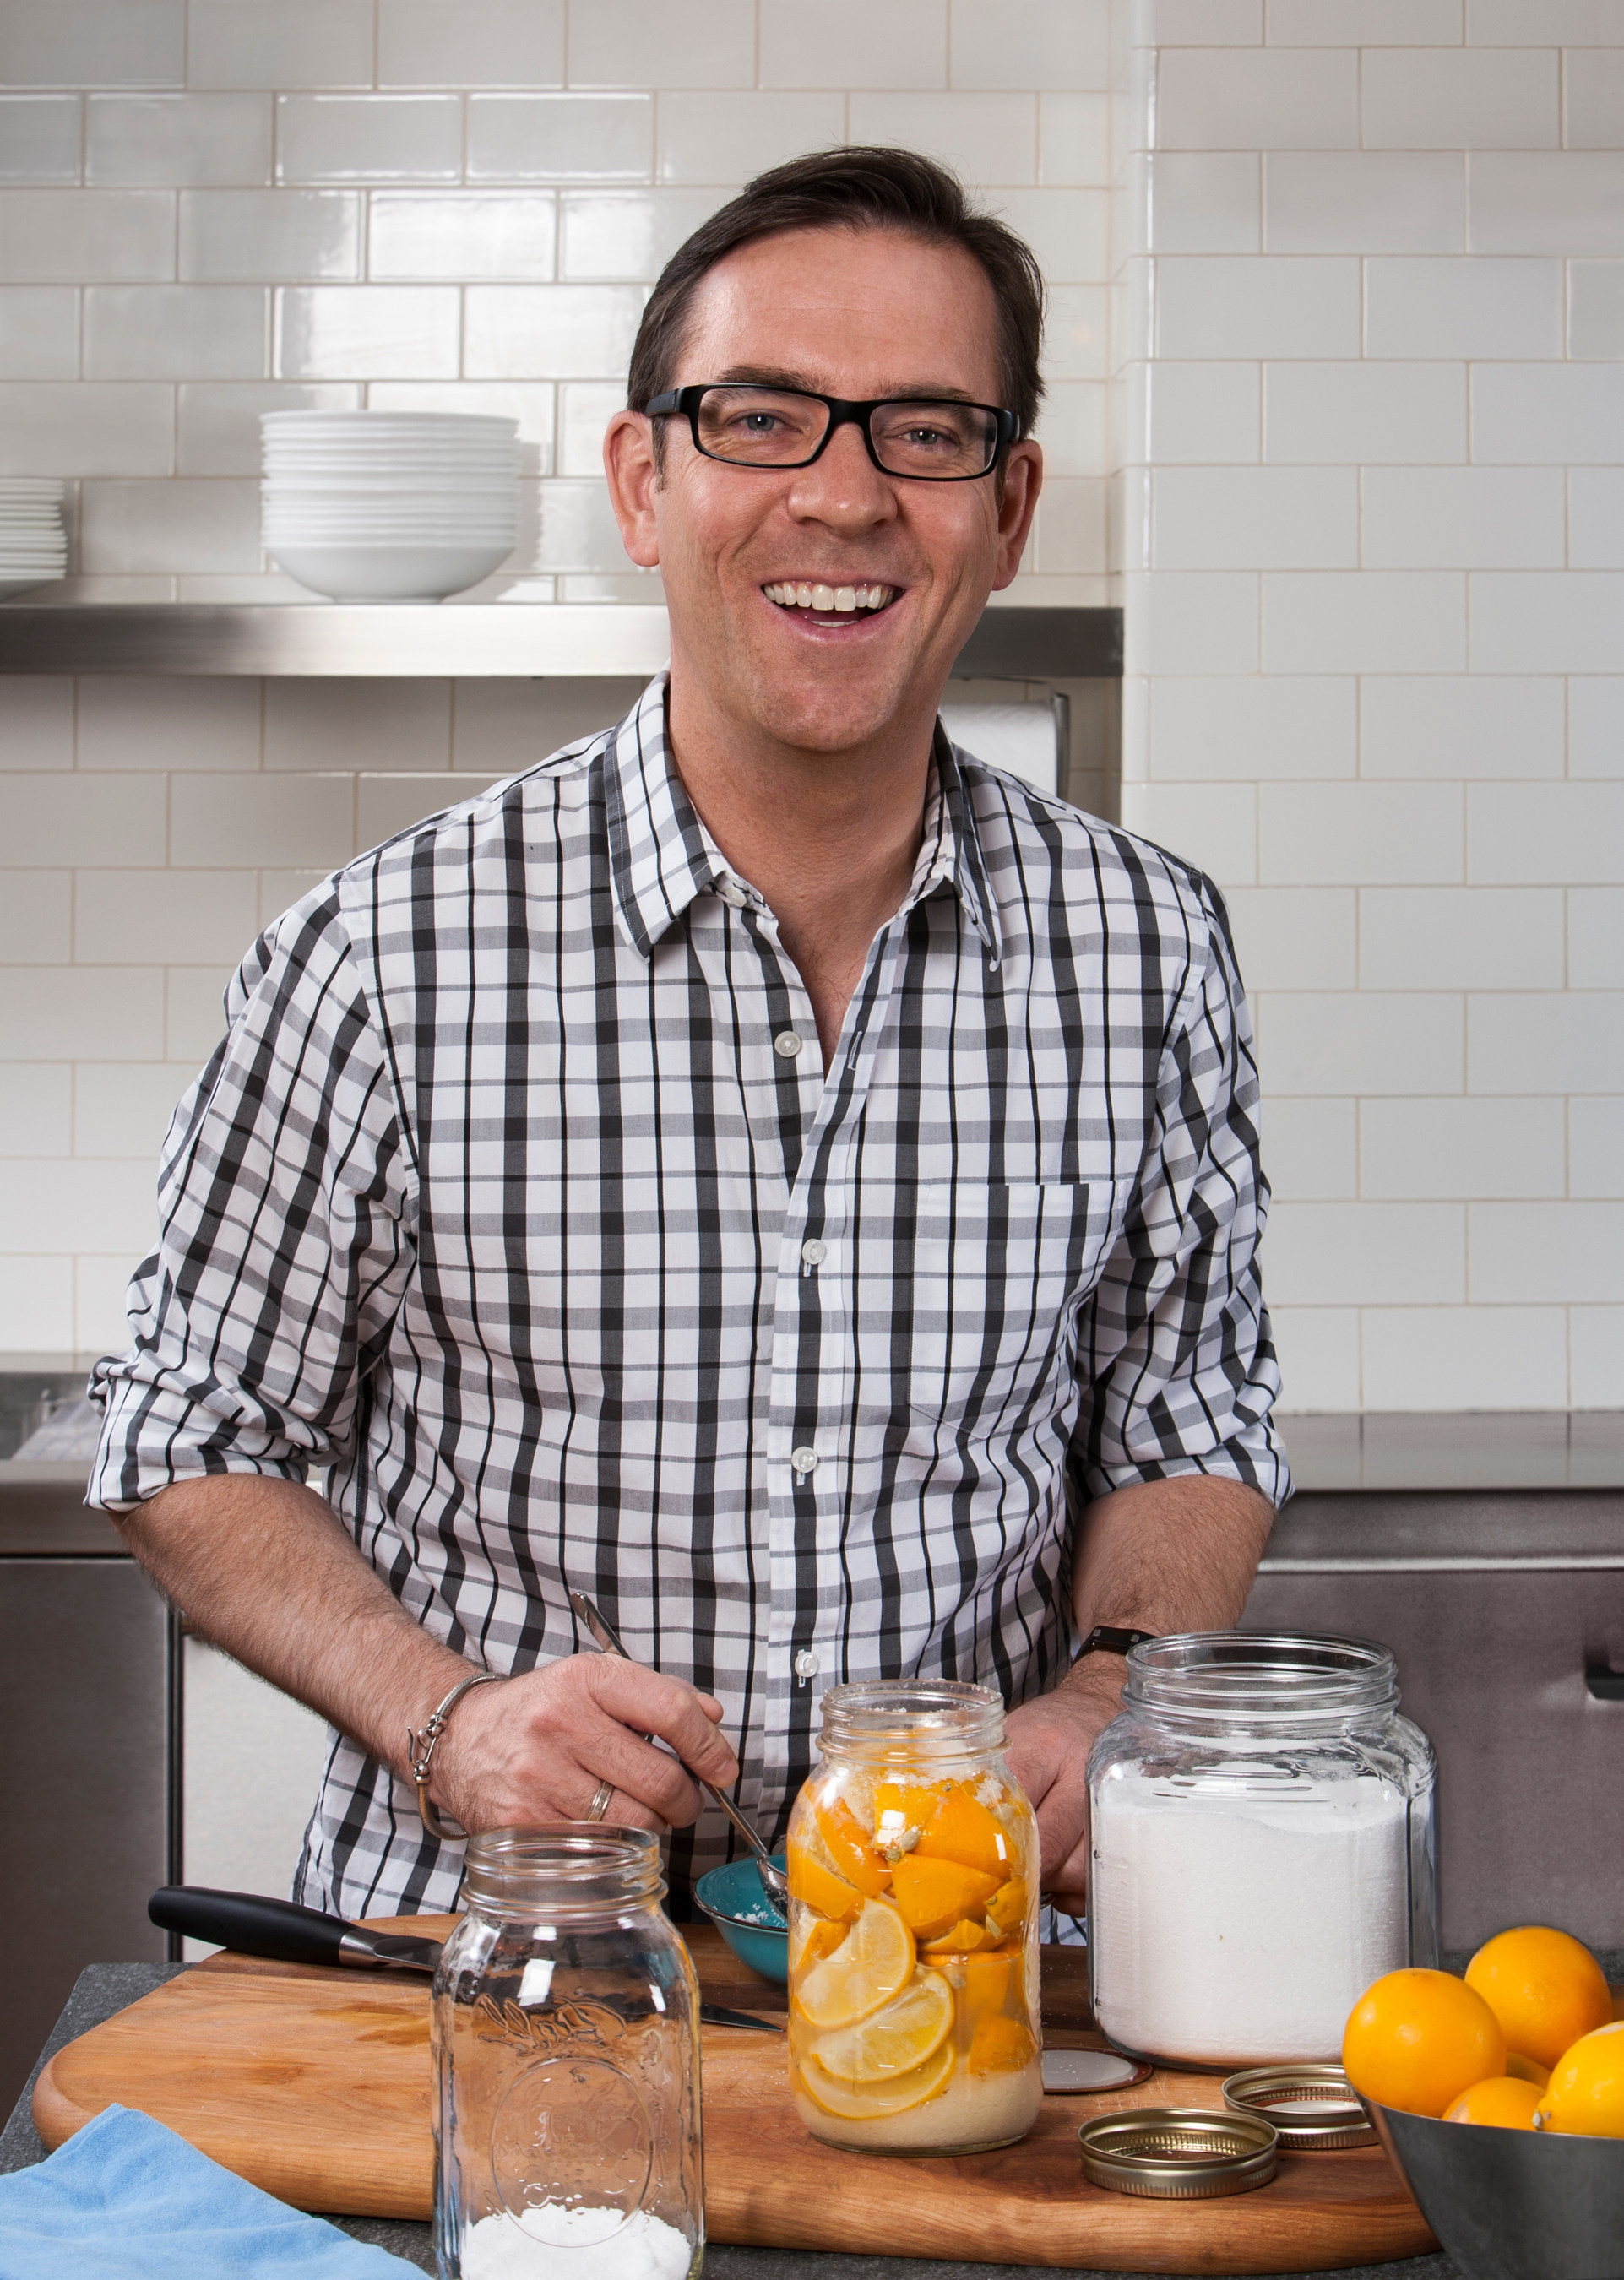 Ted Allen of Chopped to host sofi Awards, "Oscars" of Specialty Food.